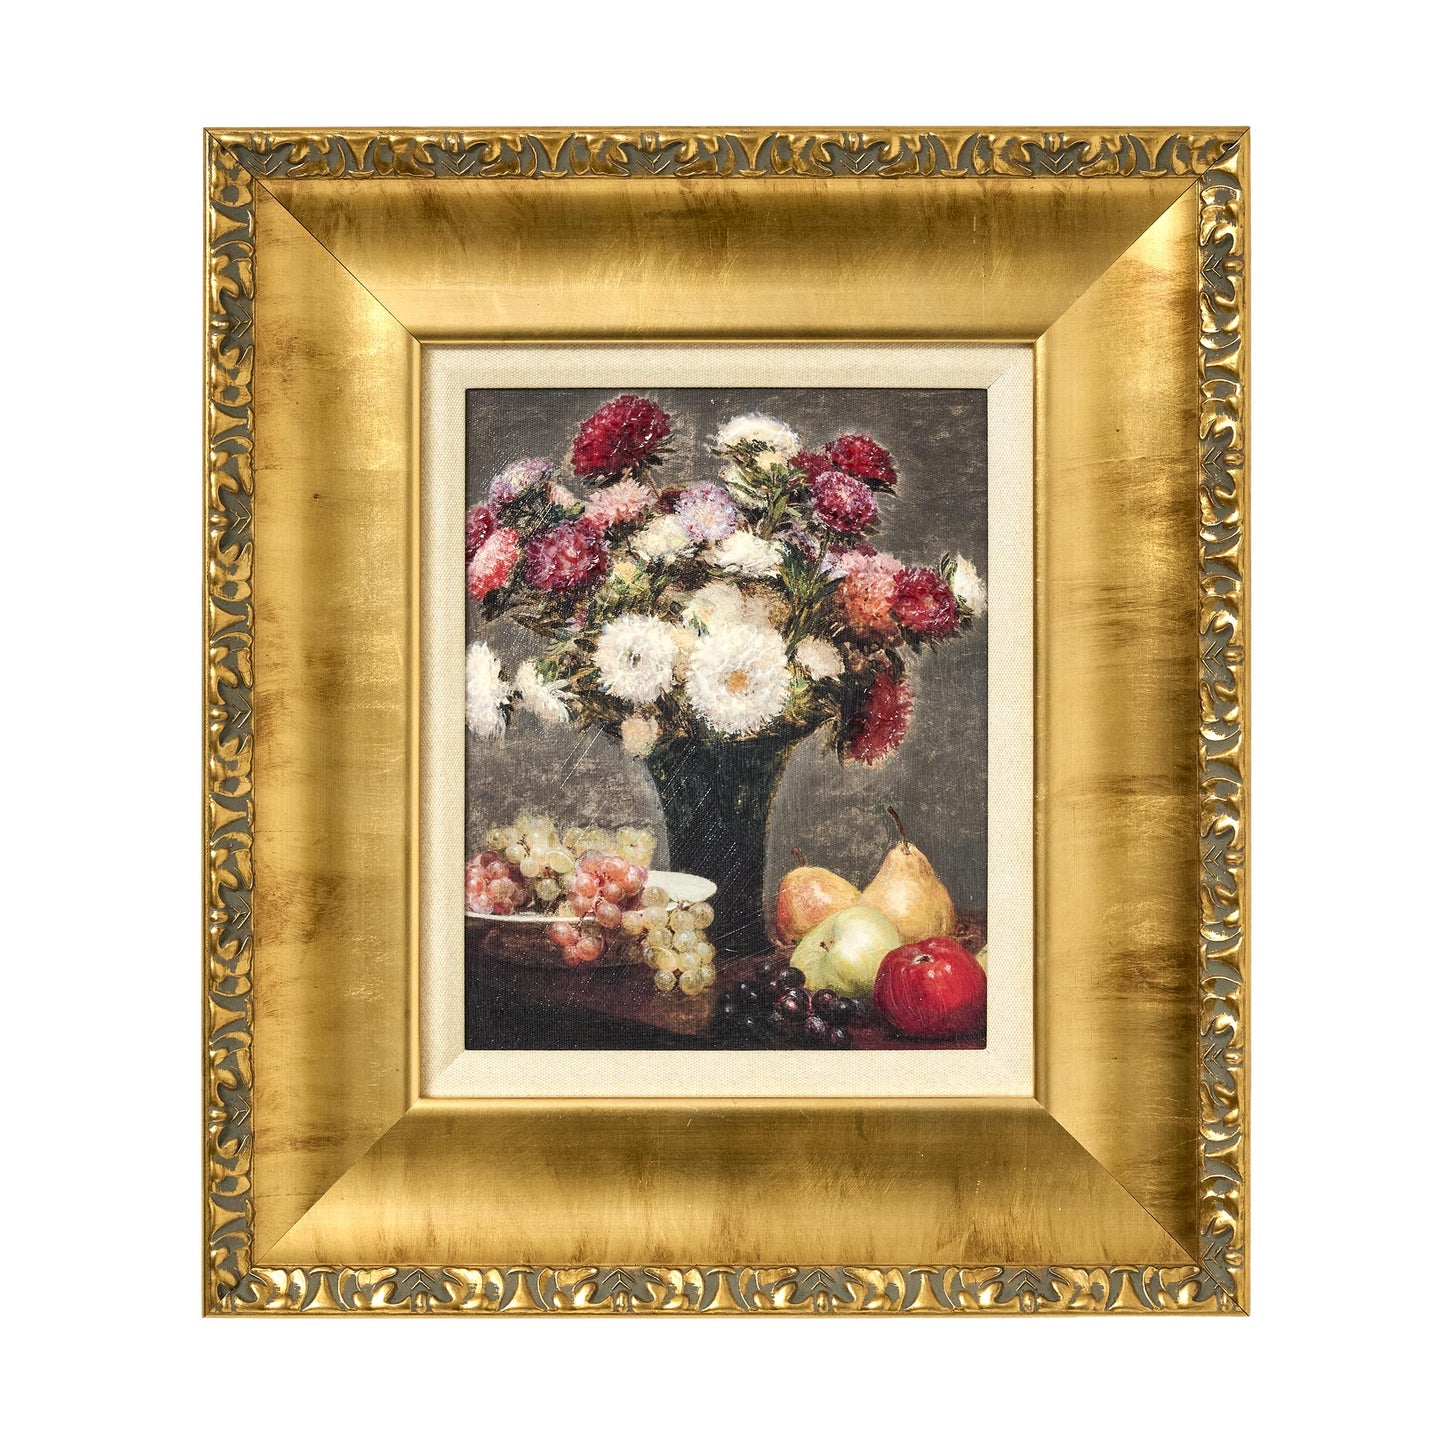 Ornate Framed Asters and Fruit Canvas Print by Henri Fantin-Latour 14.75" x 16.75"